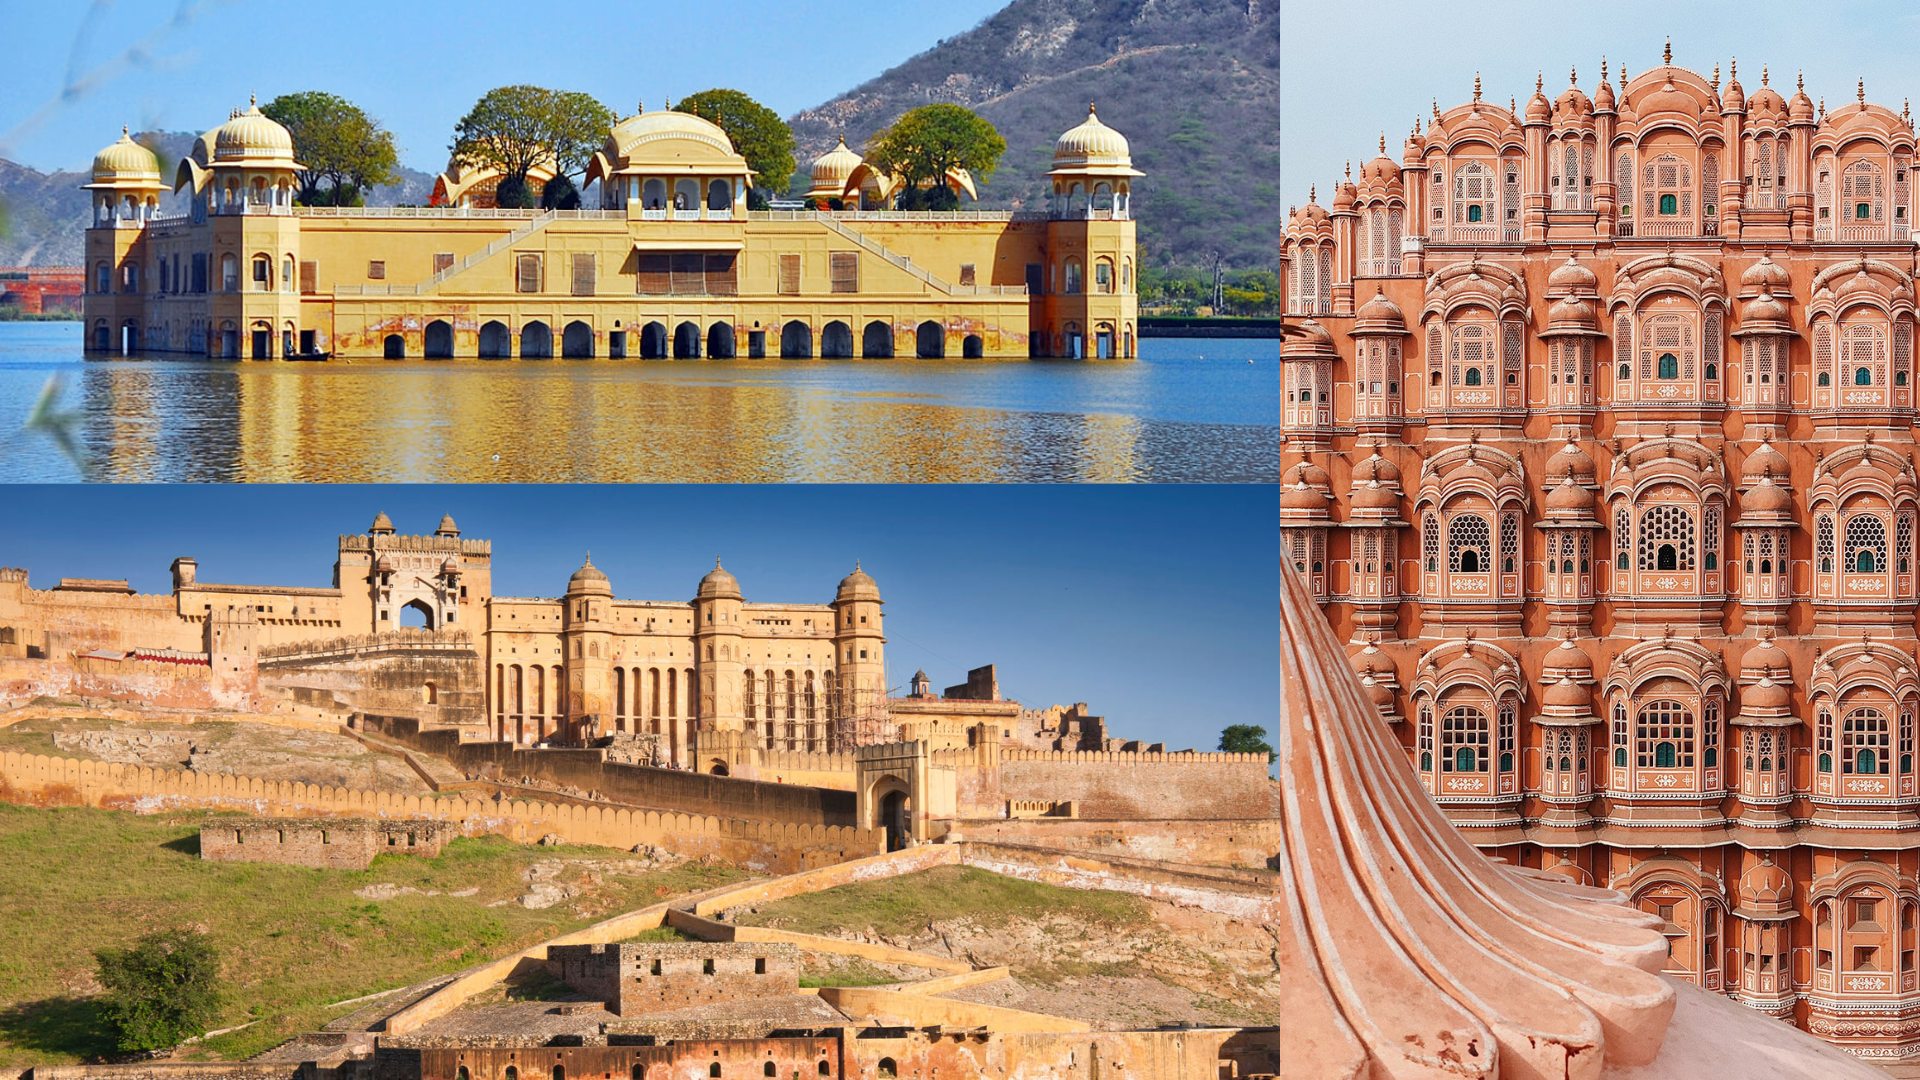 About and History of Jaipur 